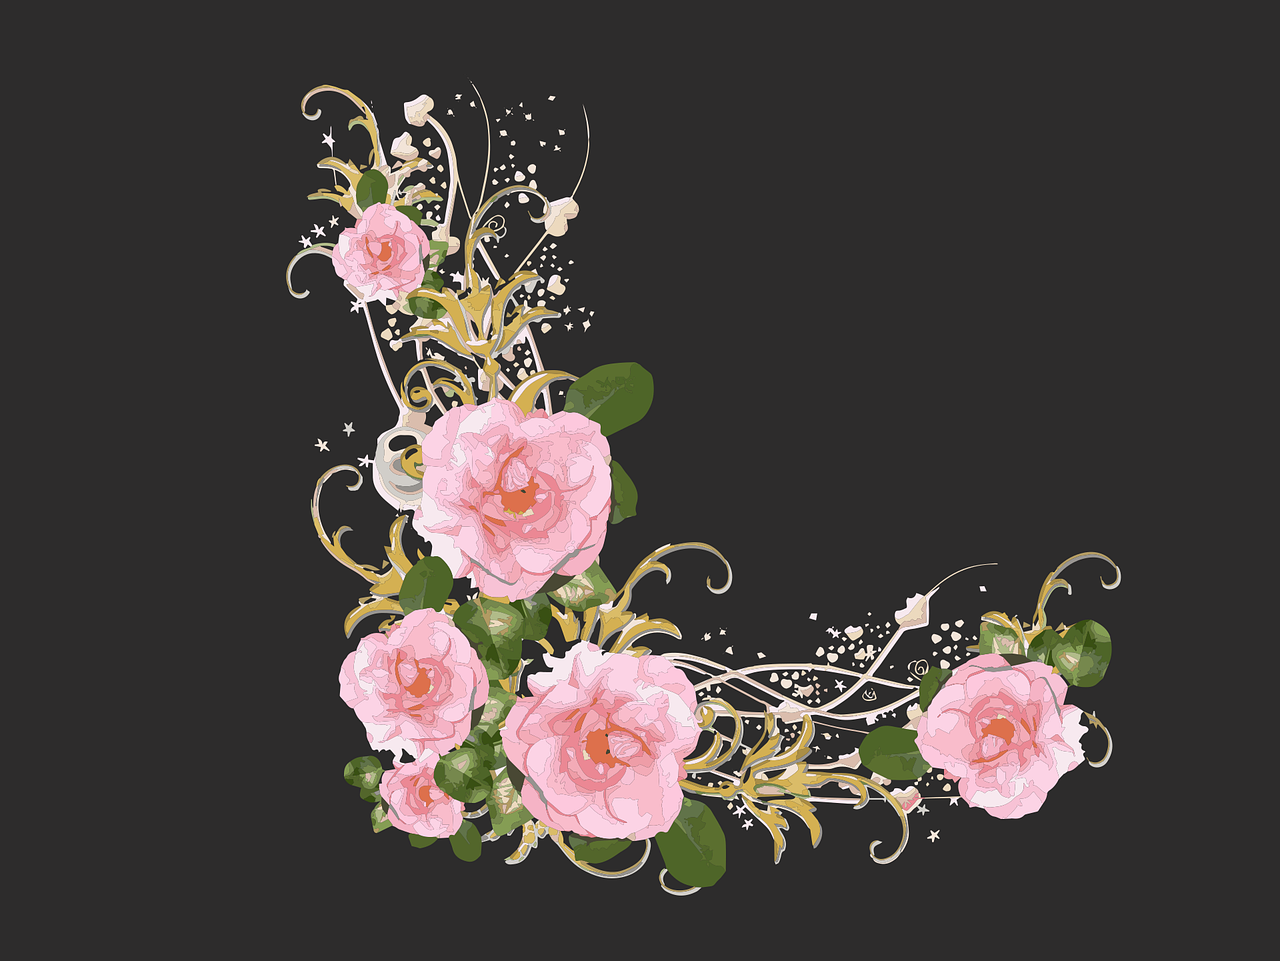 a floral design with pink roses on a black background, a digital rendering, art nouveau, golden jewelry filigree, without text, rose-brambles, golden ratio illustration